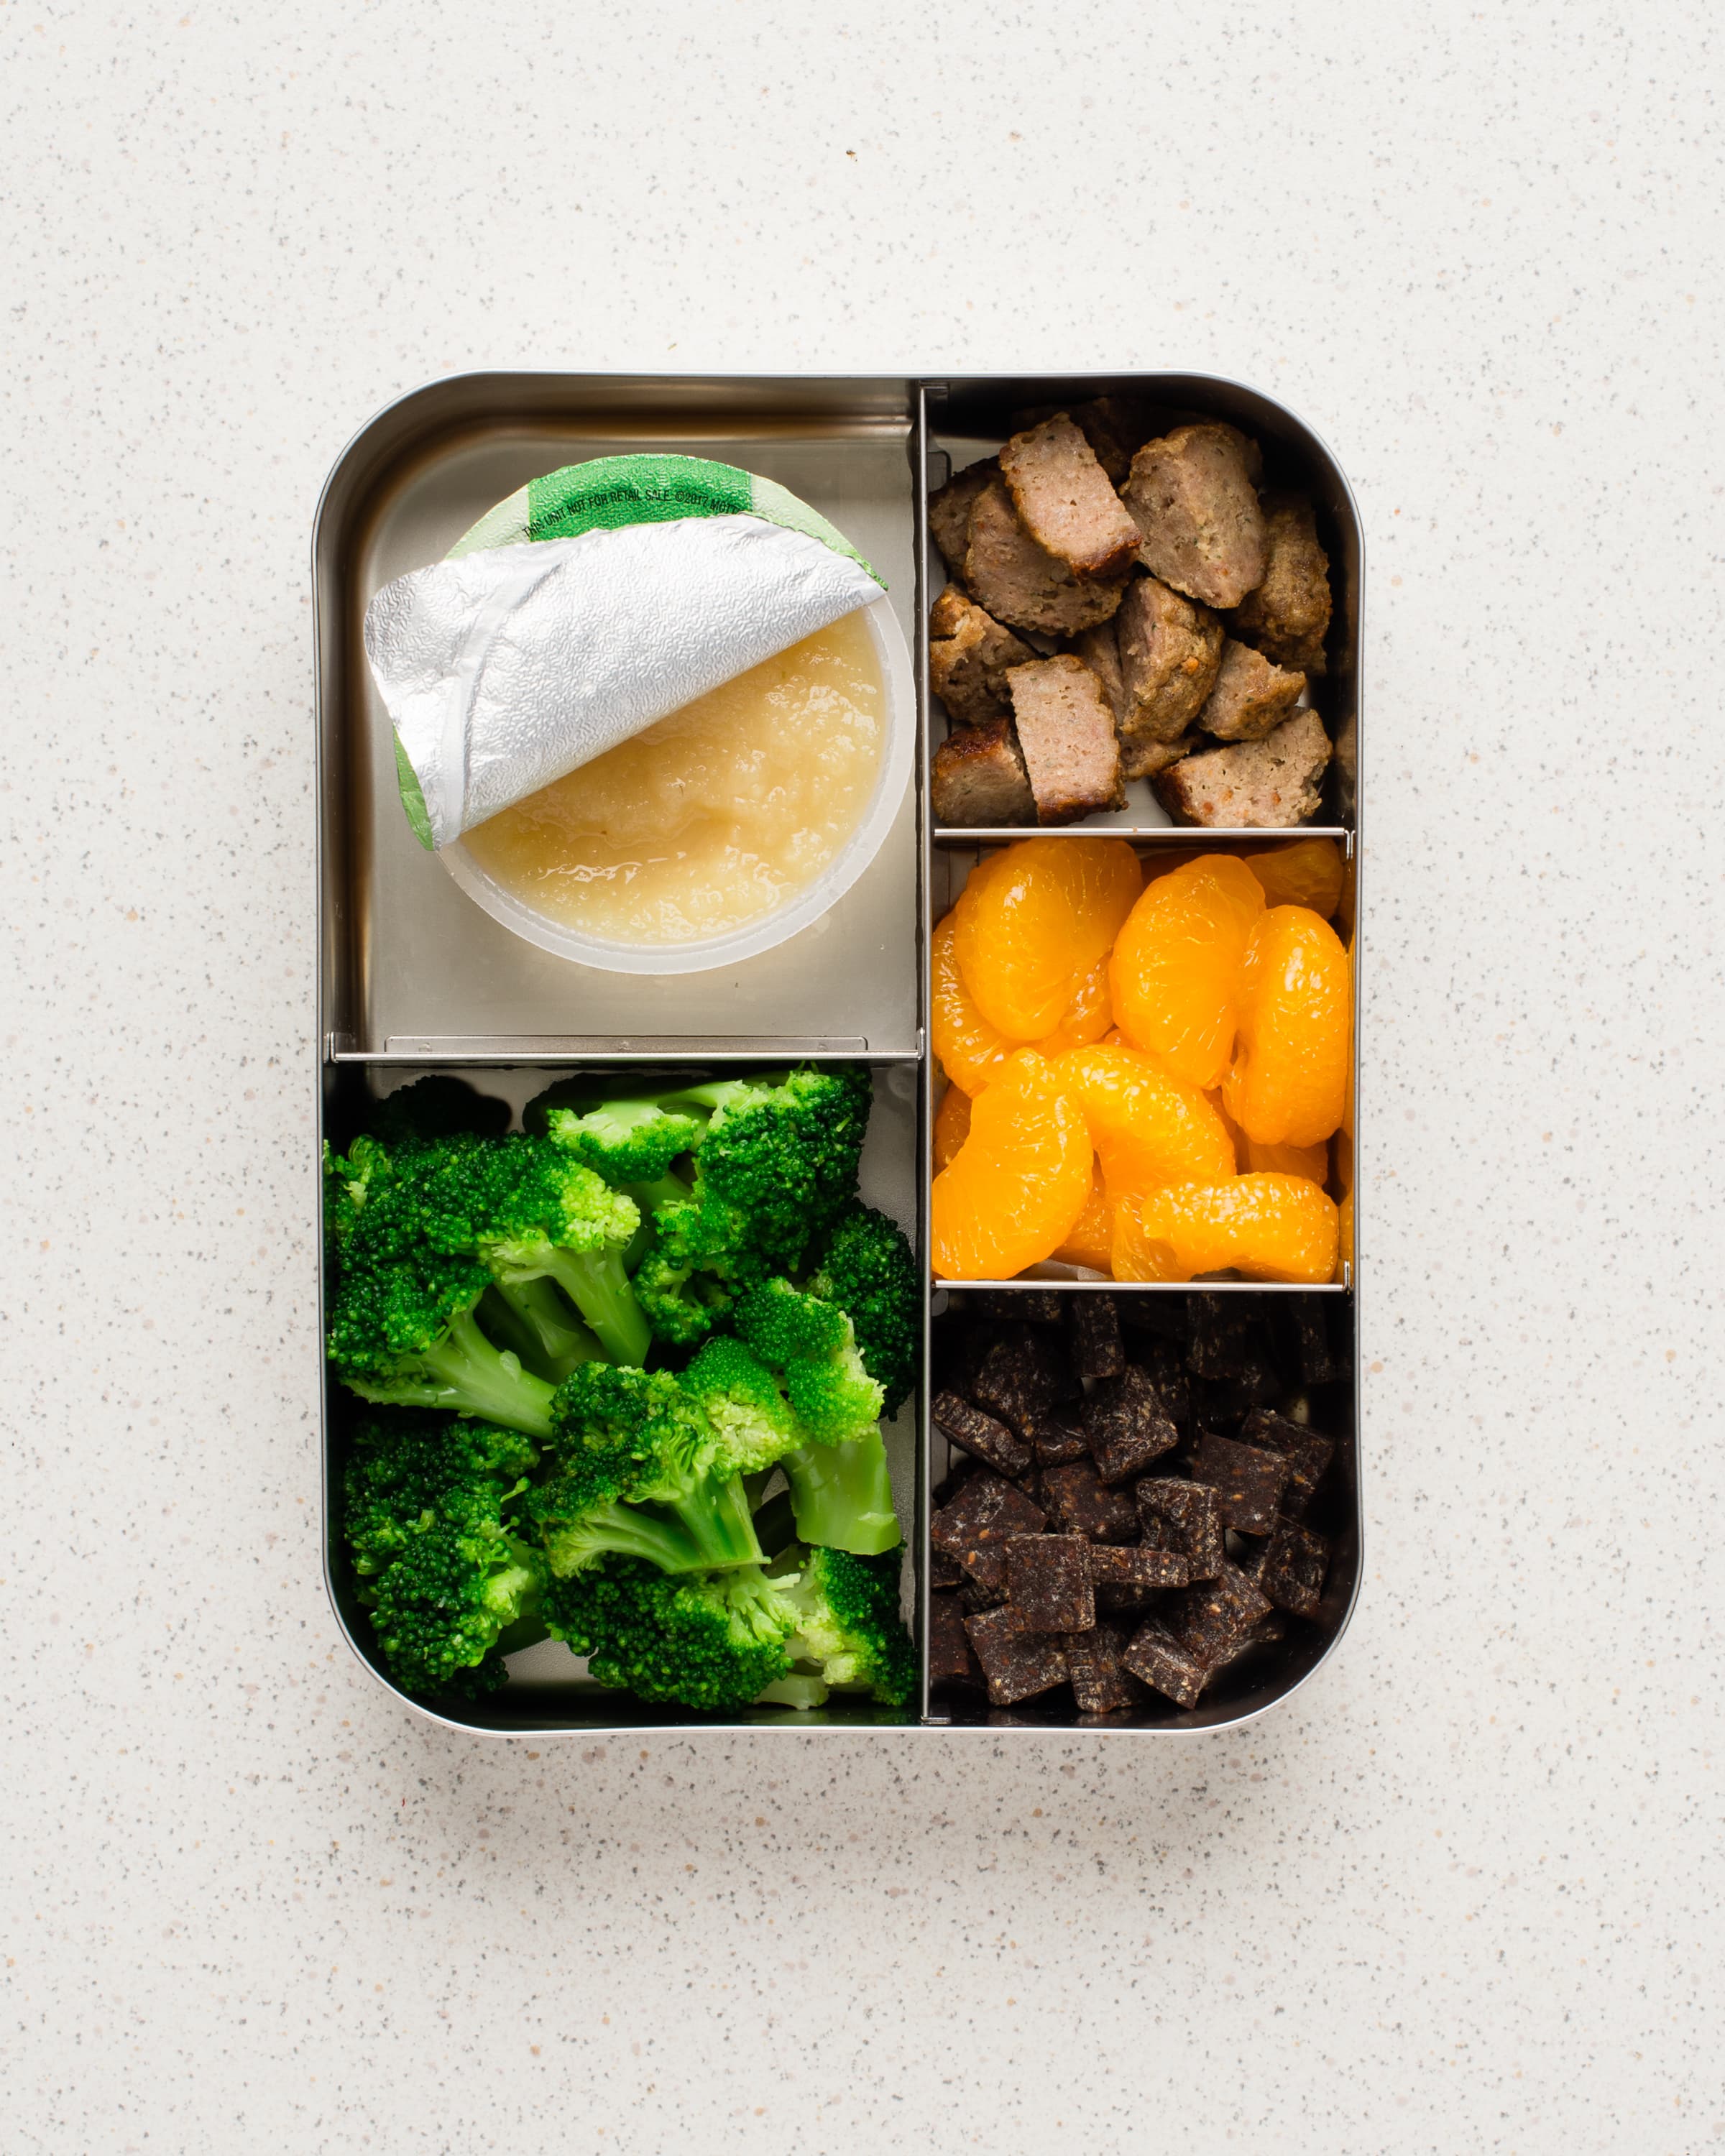 Easy and nutritious toddler lunch — these are some of my toddler's